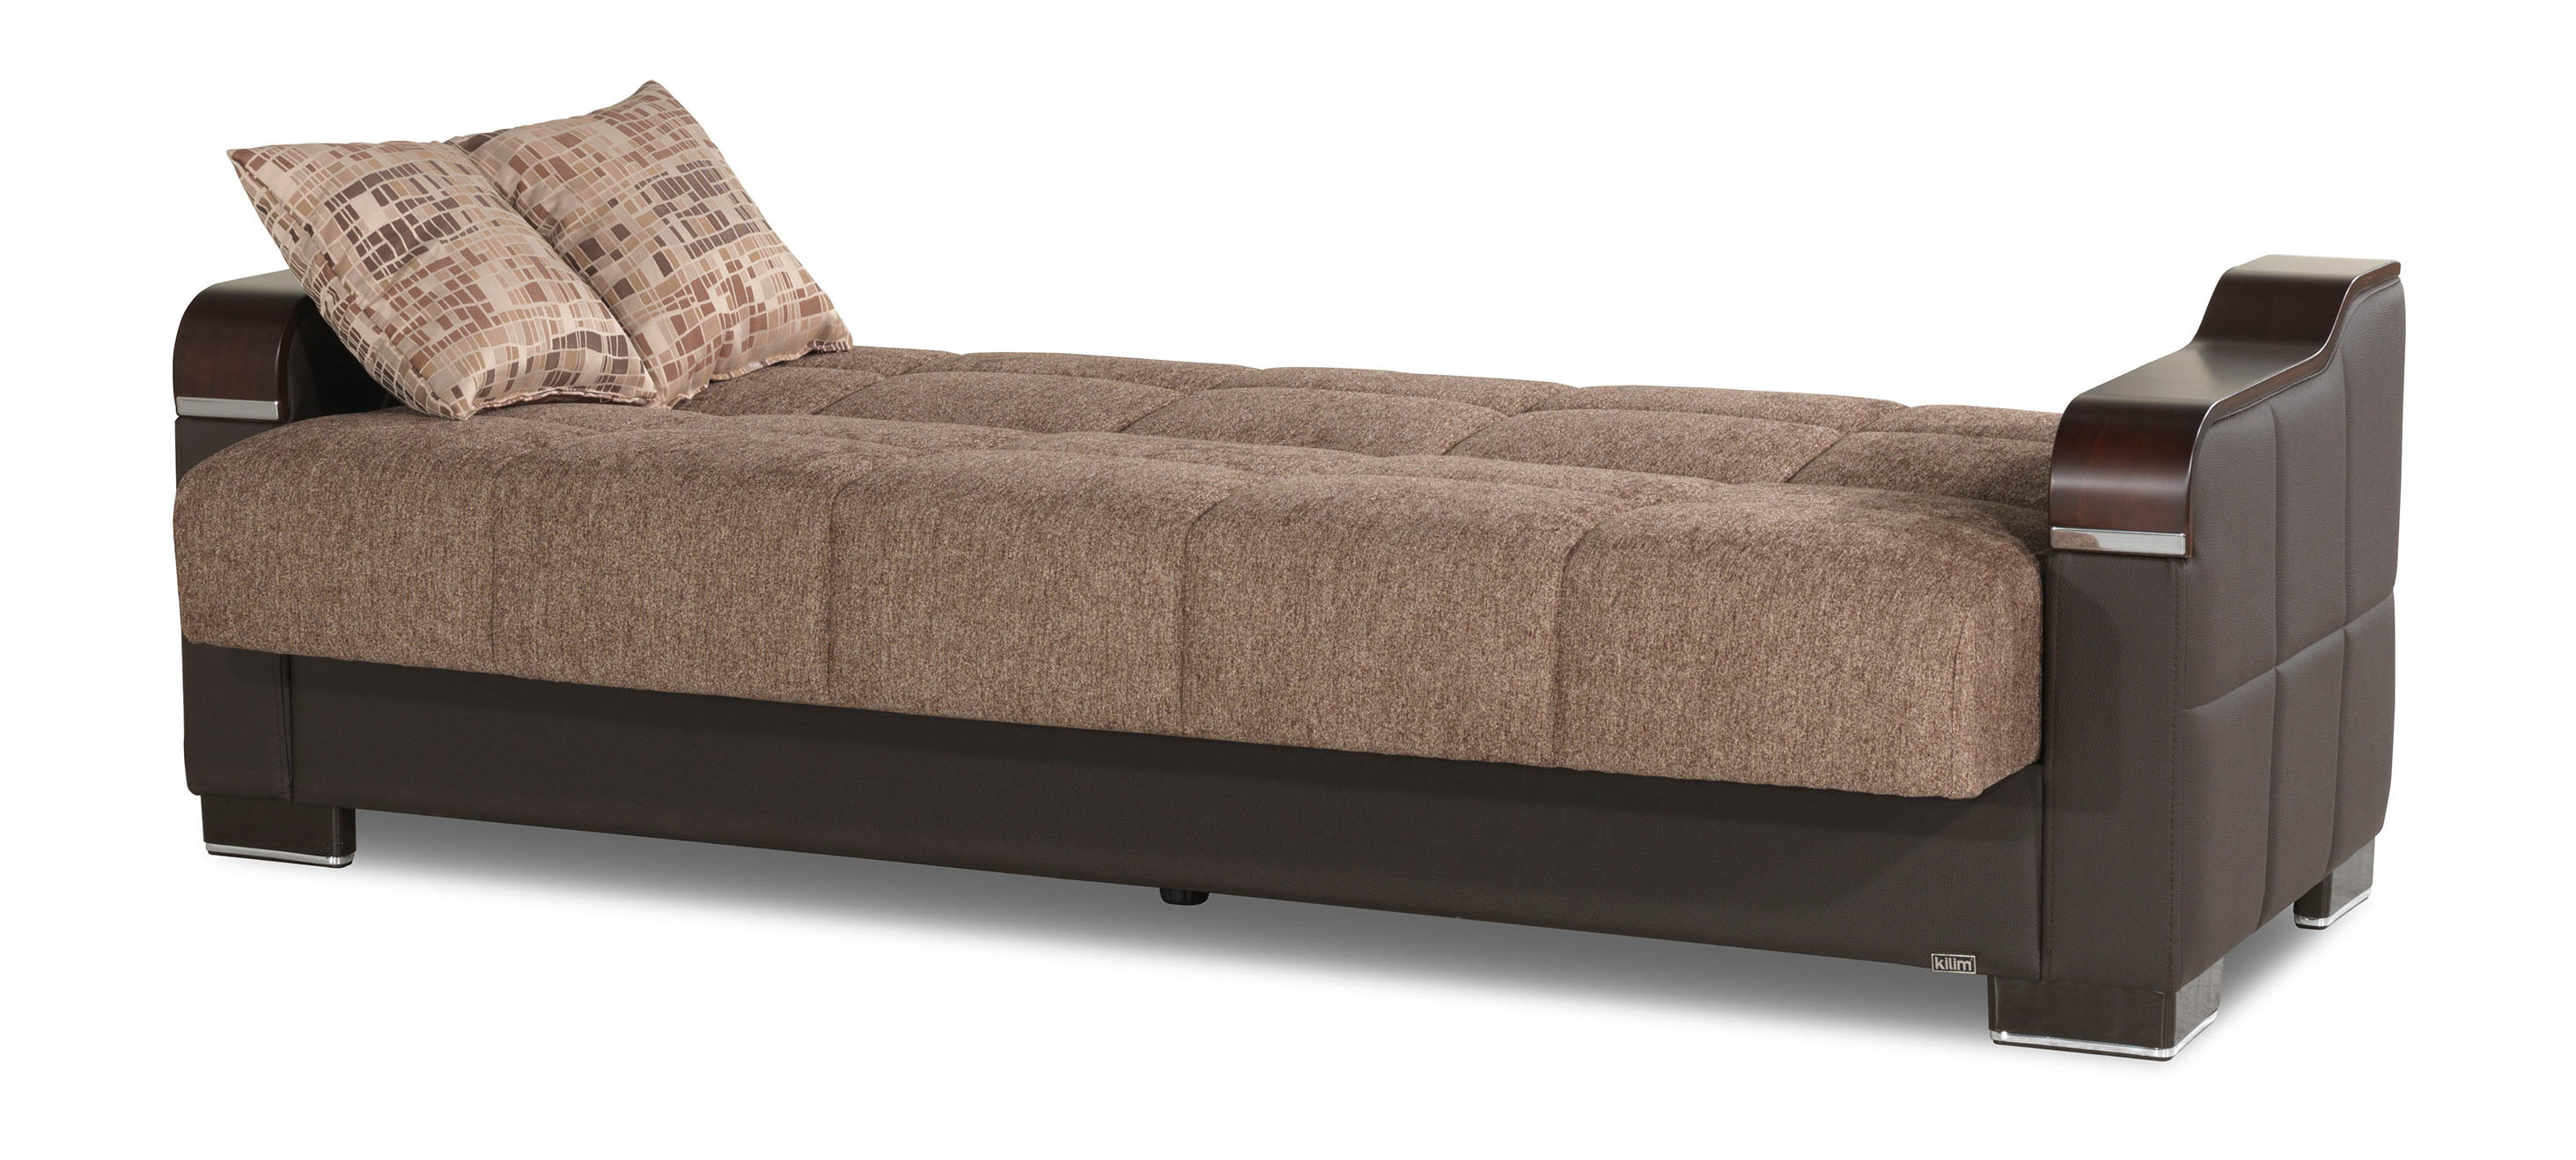 uptown sofa bed review